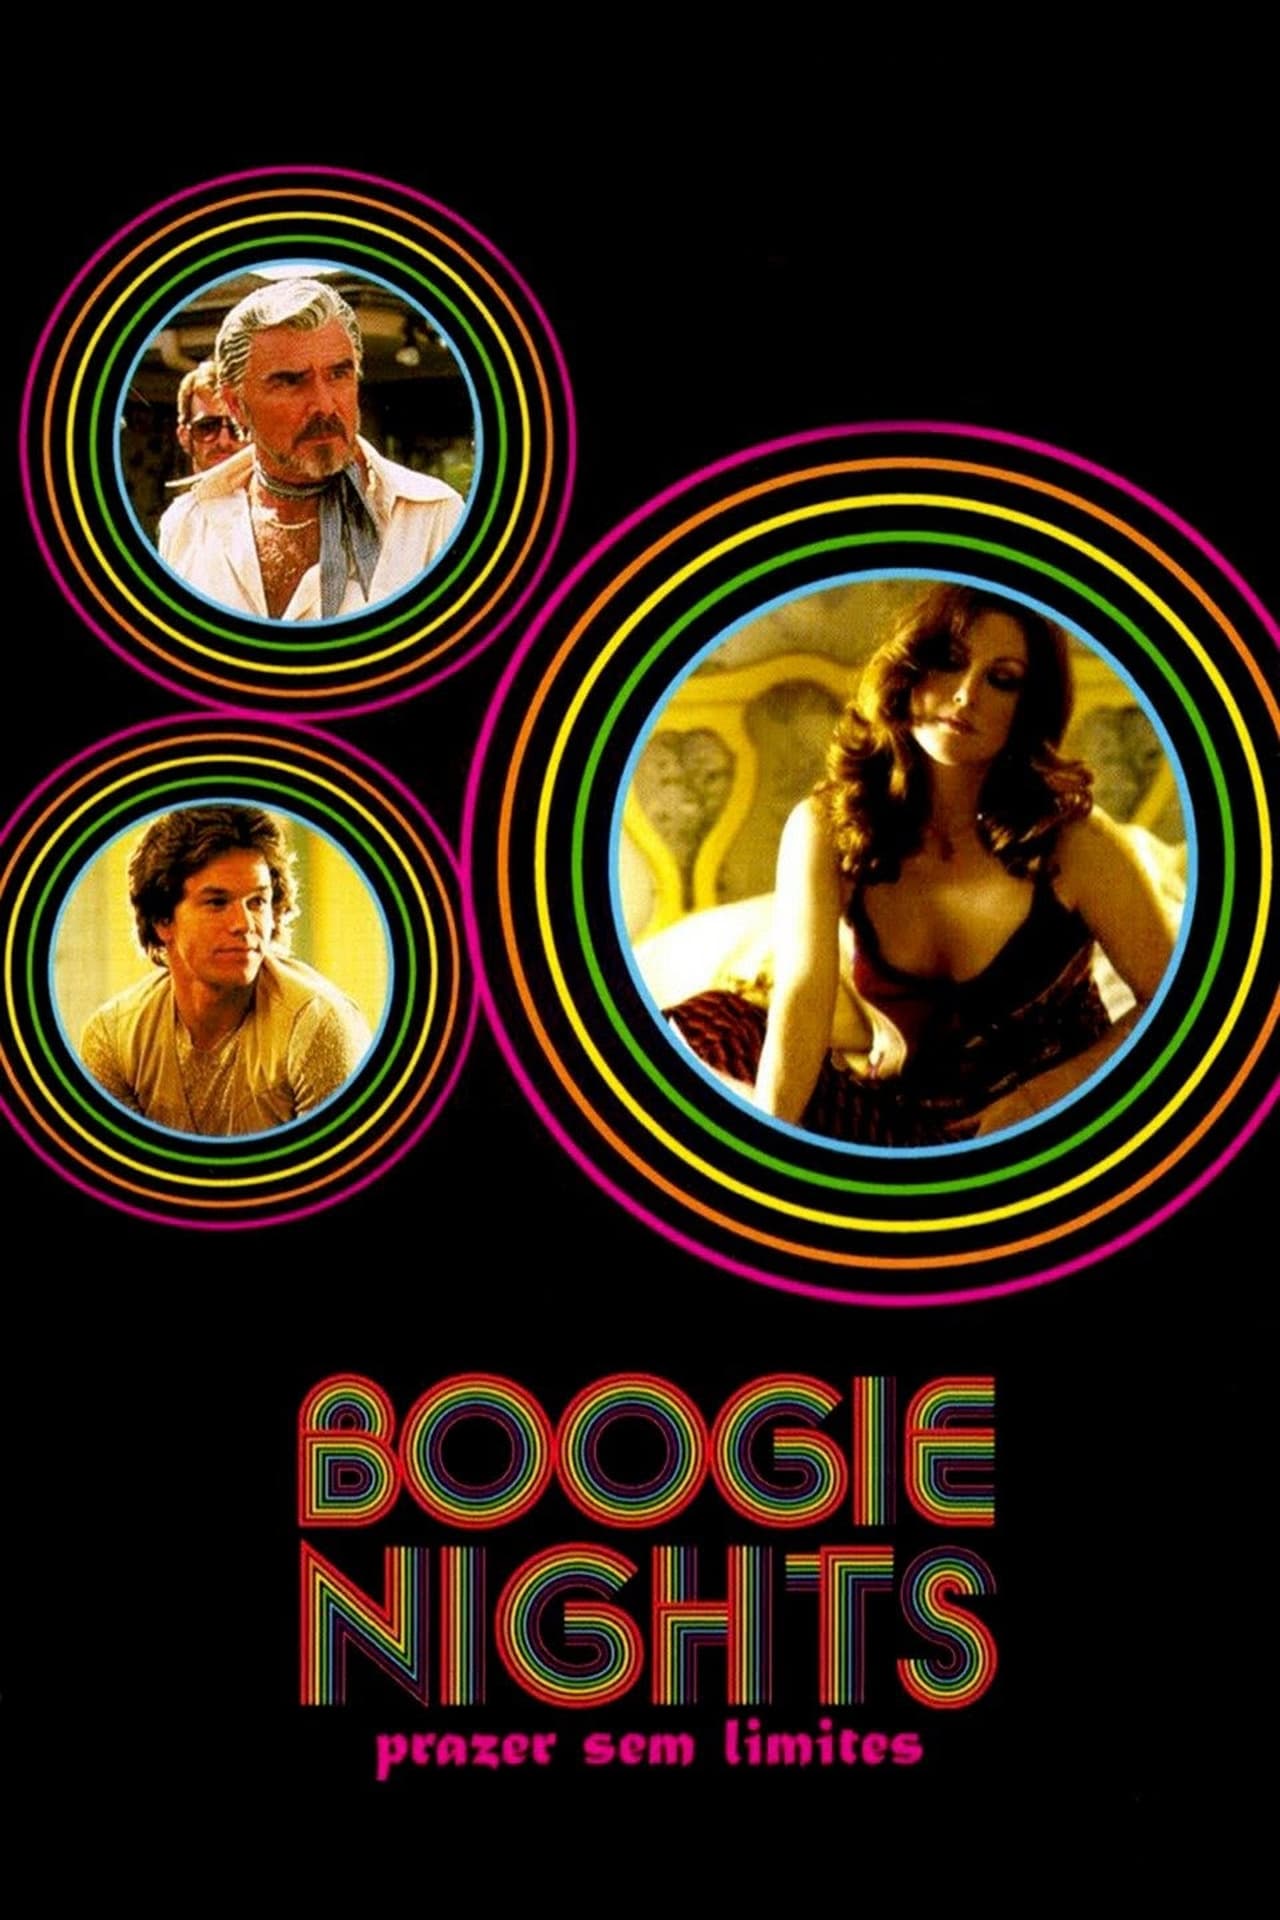 Boogie Nights wiki, synopsis, reviews, watch and download